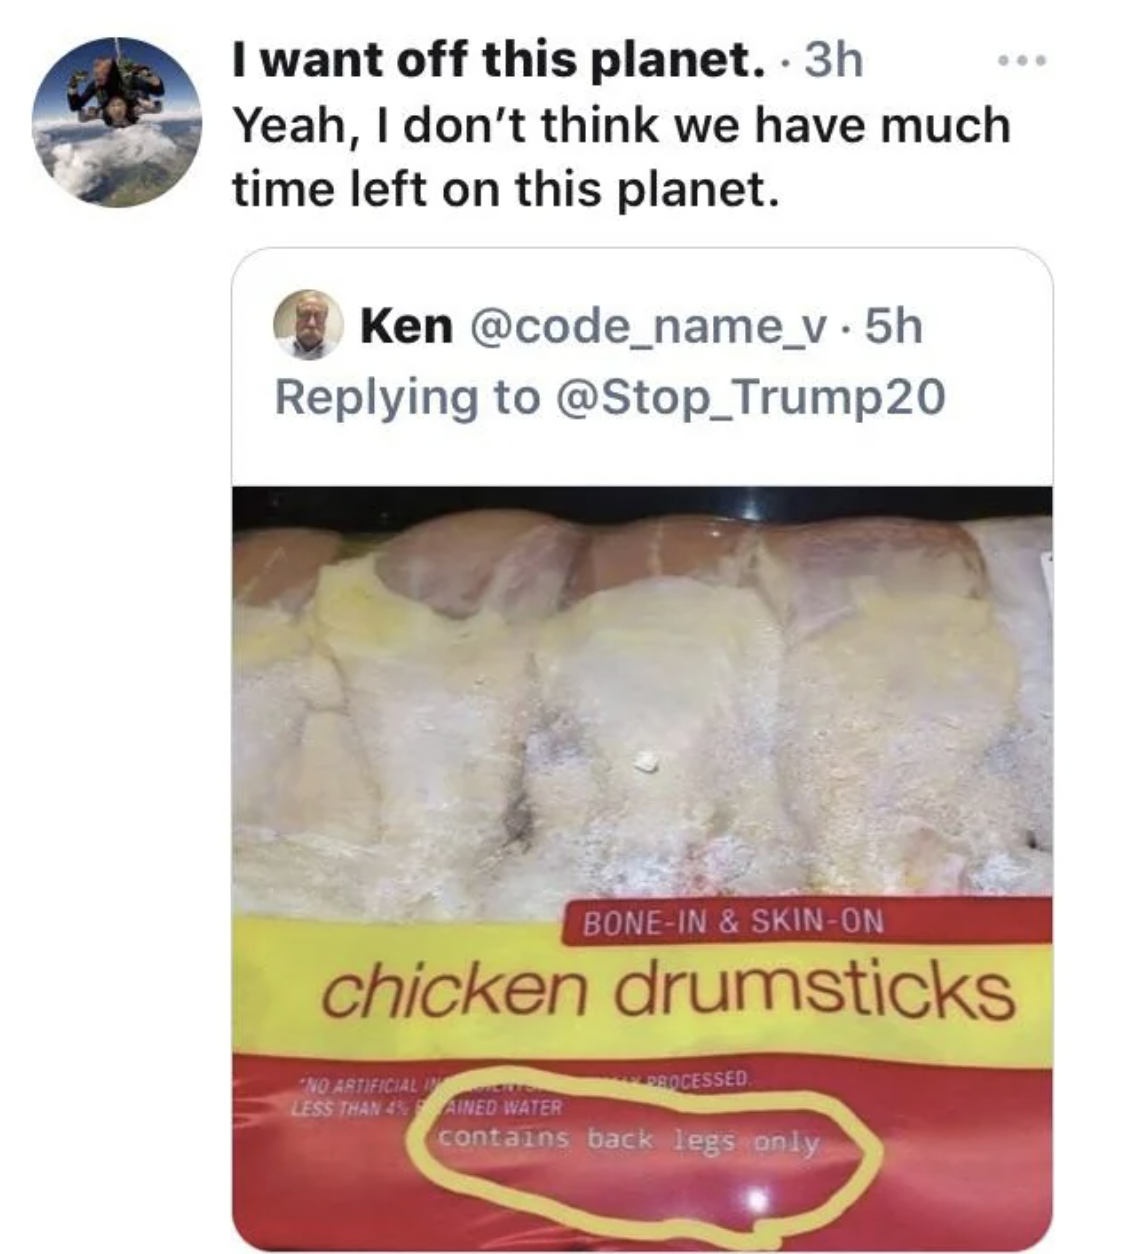 facepalms - chicken drumsticks contains back legs only - I want off this planet. 3h Yeah, I don't think we have much time left on this planet. Ken . 5h BoneIn & SkinOn chicken drumsticks Artificial Less Than Ained Water contains back legs only